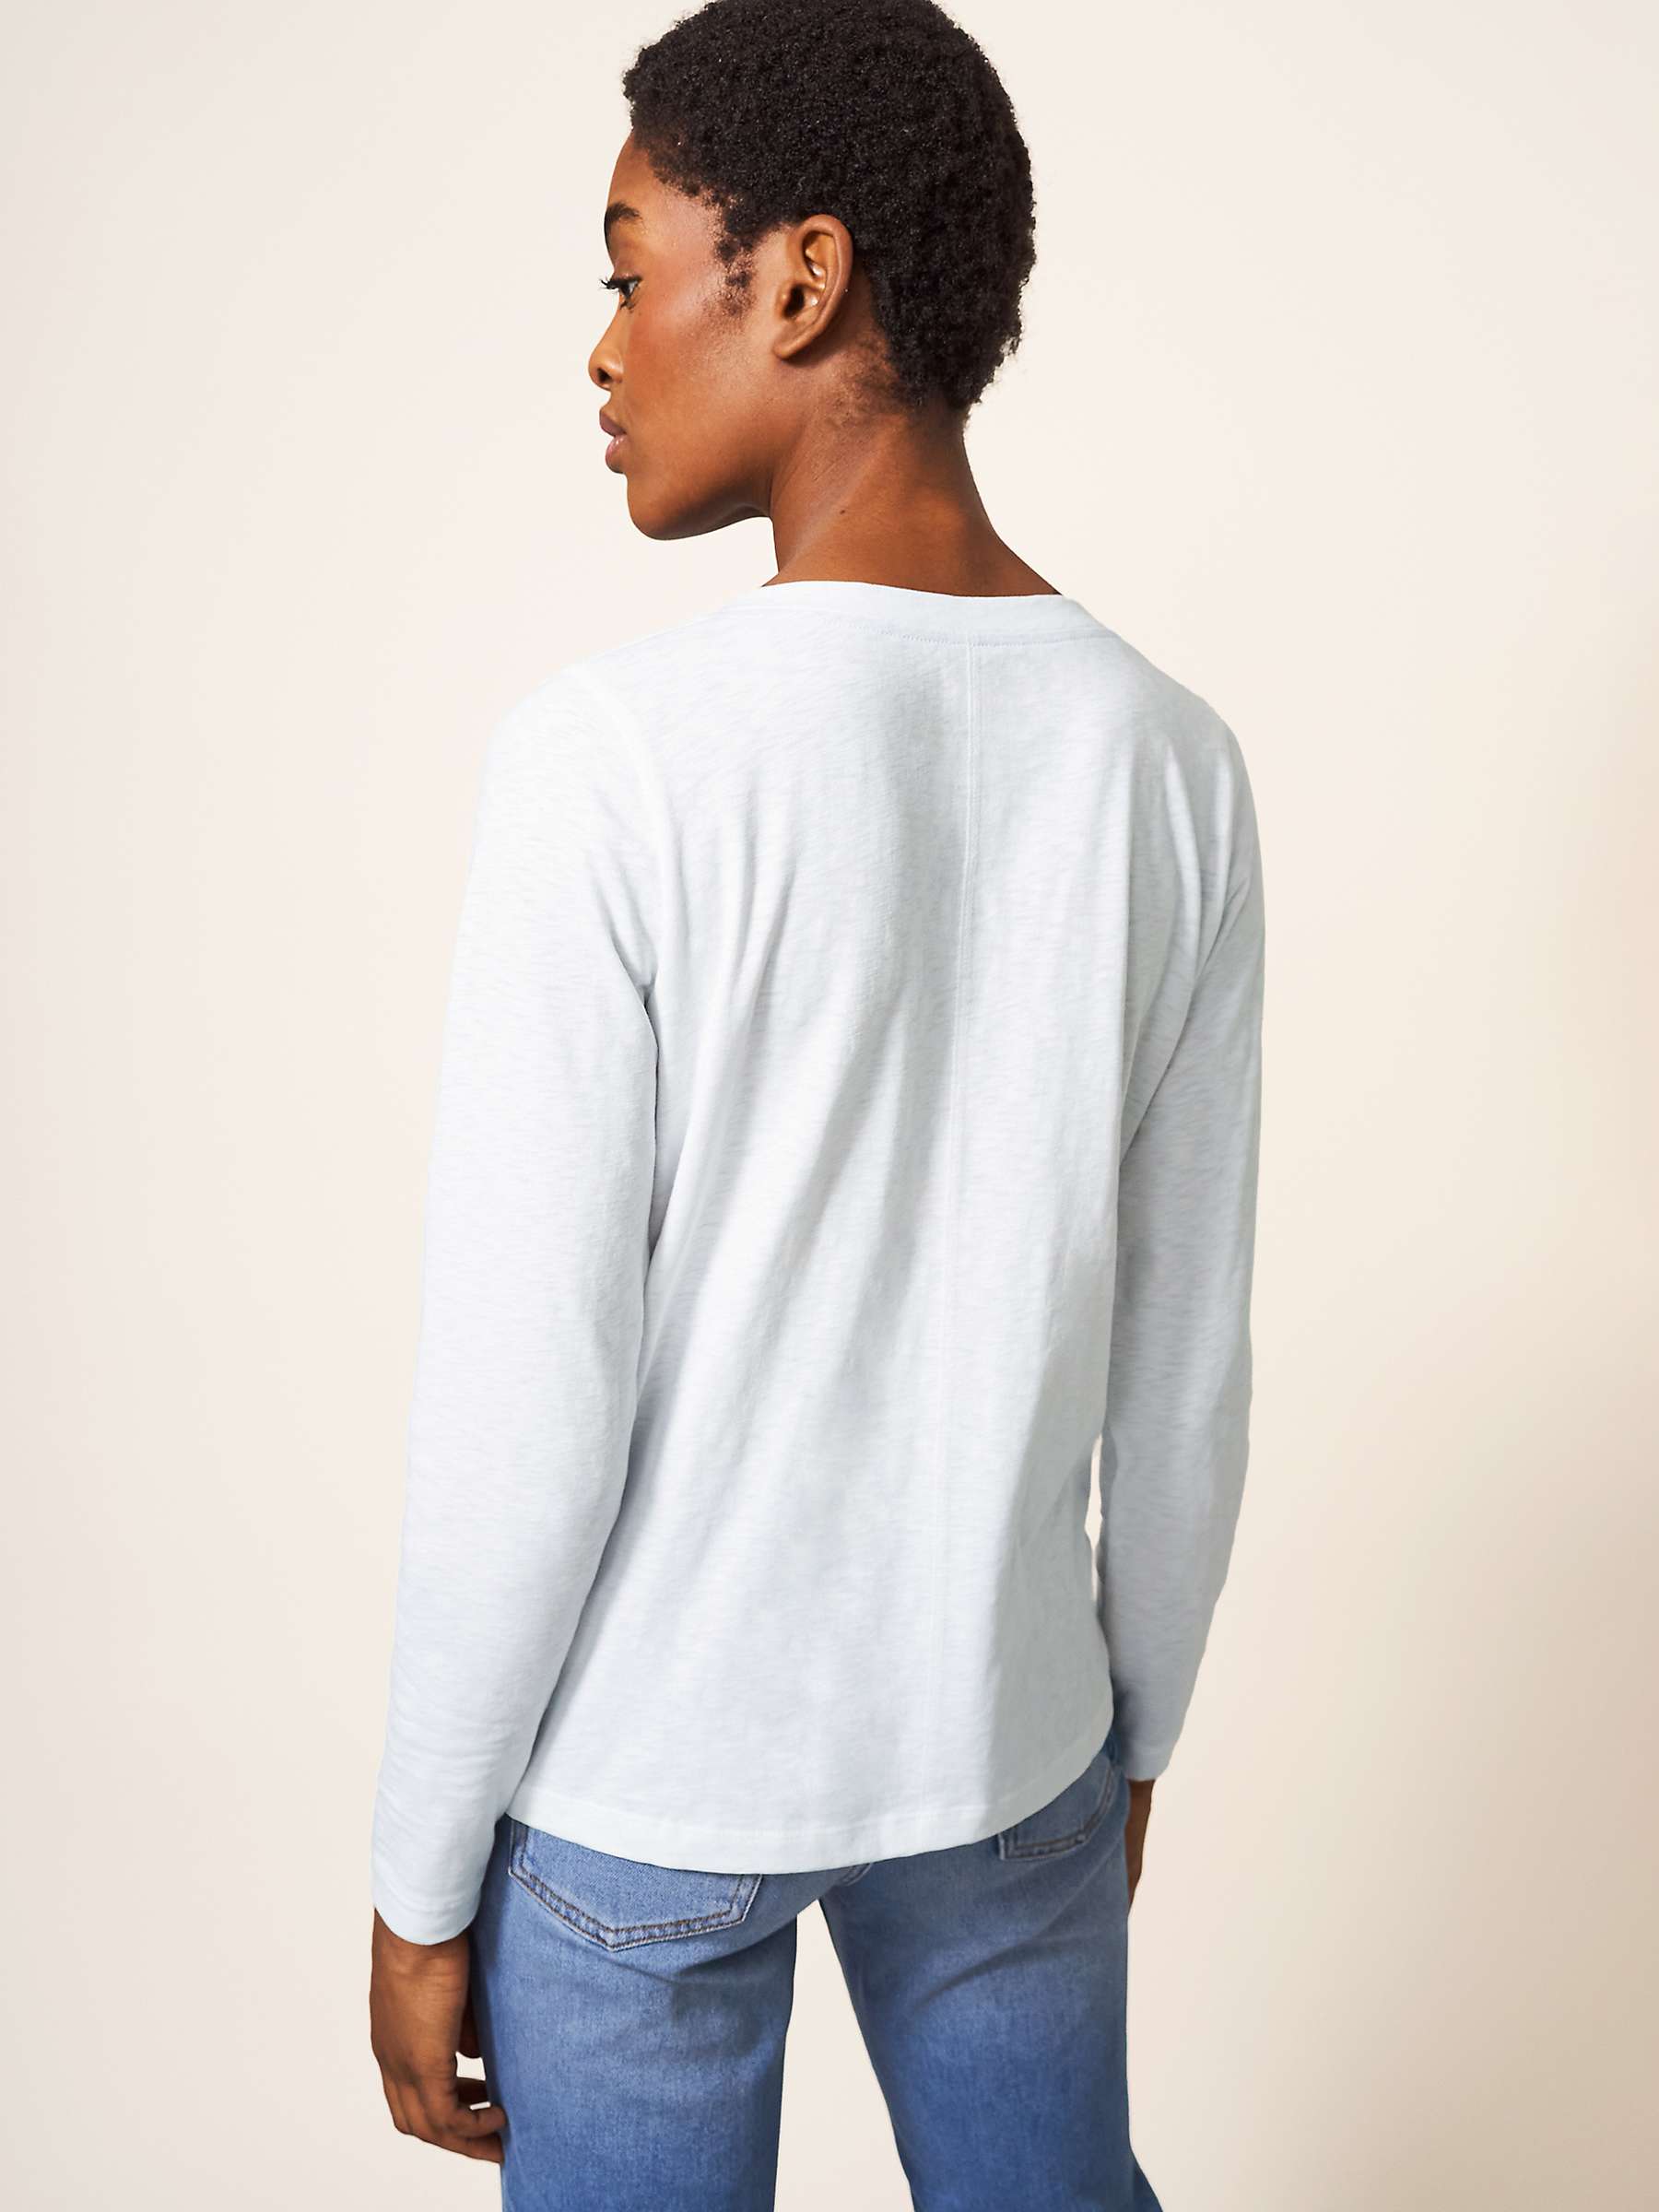 Buy White Stuff Nelly Cotton Long Sleeve T-Shirt Online at johnlewis.com